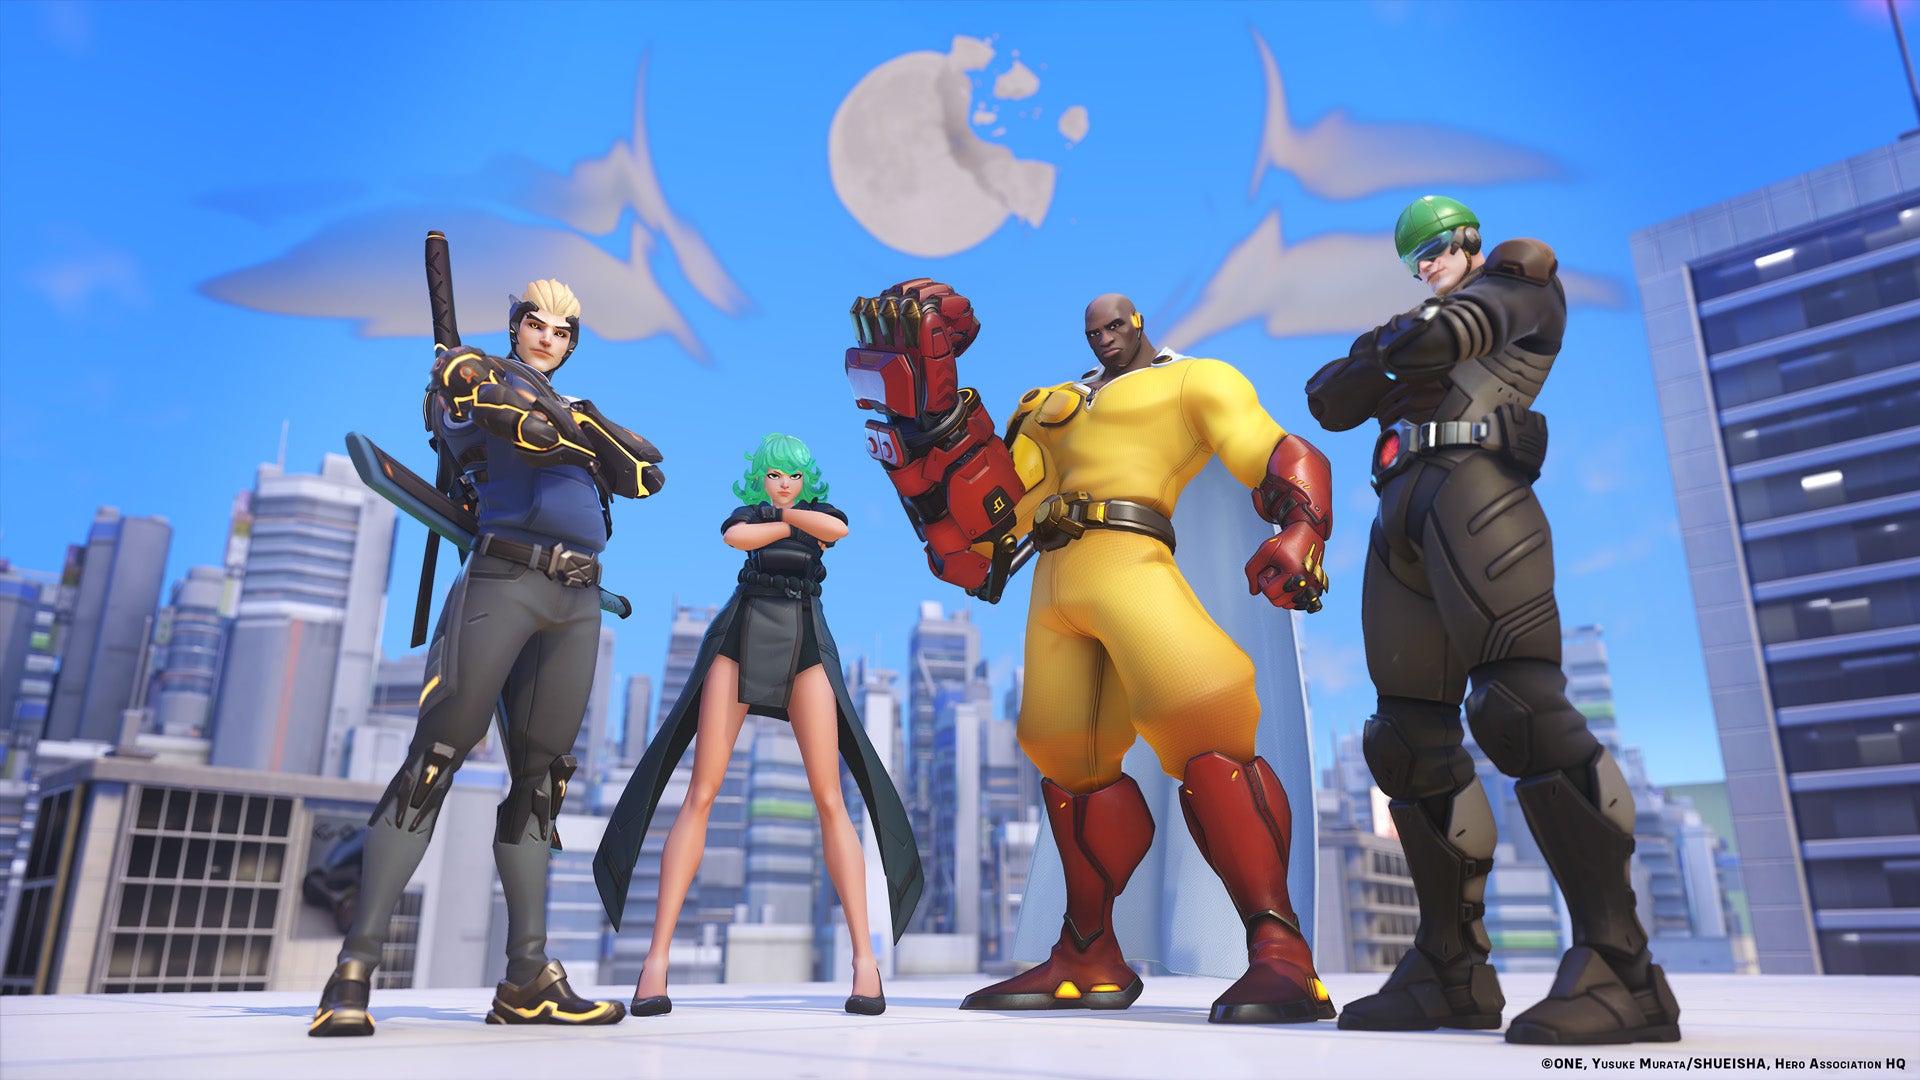 You can expect more Overwatch 2 crossover events in the future